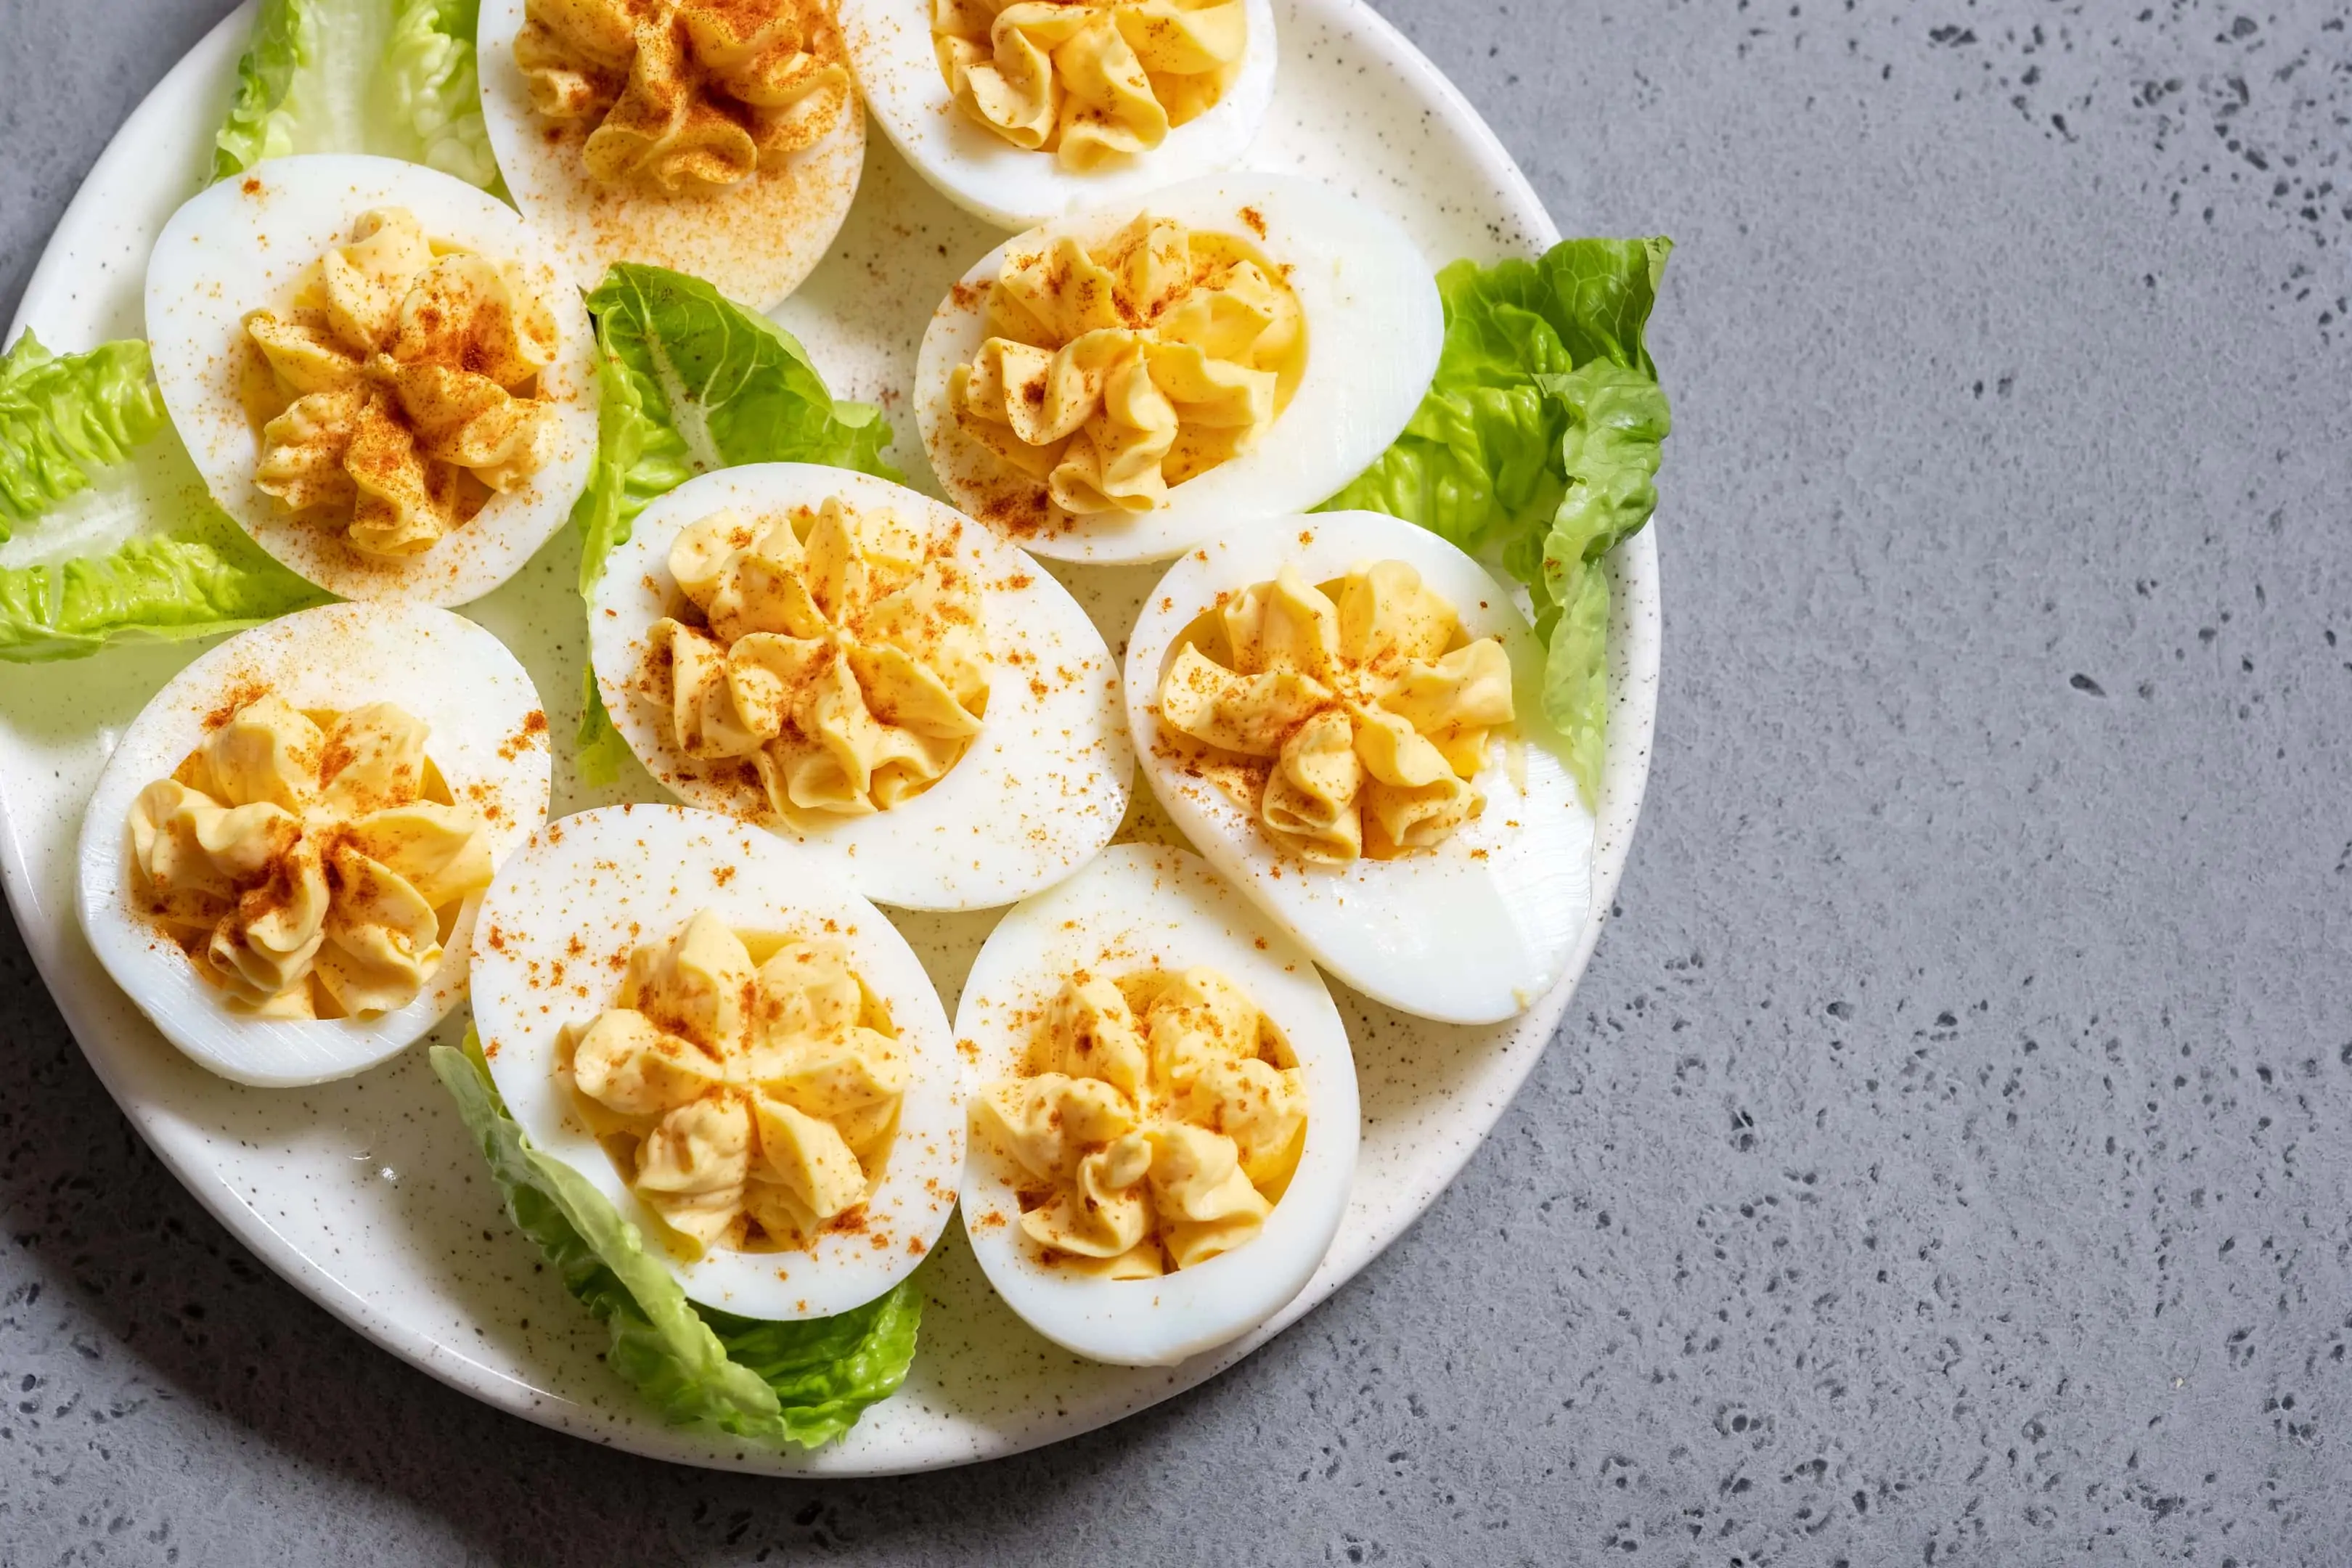 Deviled egg recipe with relish and lettuce